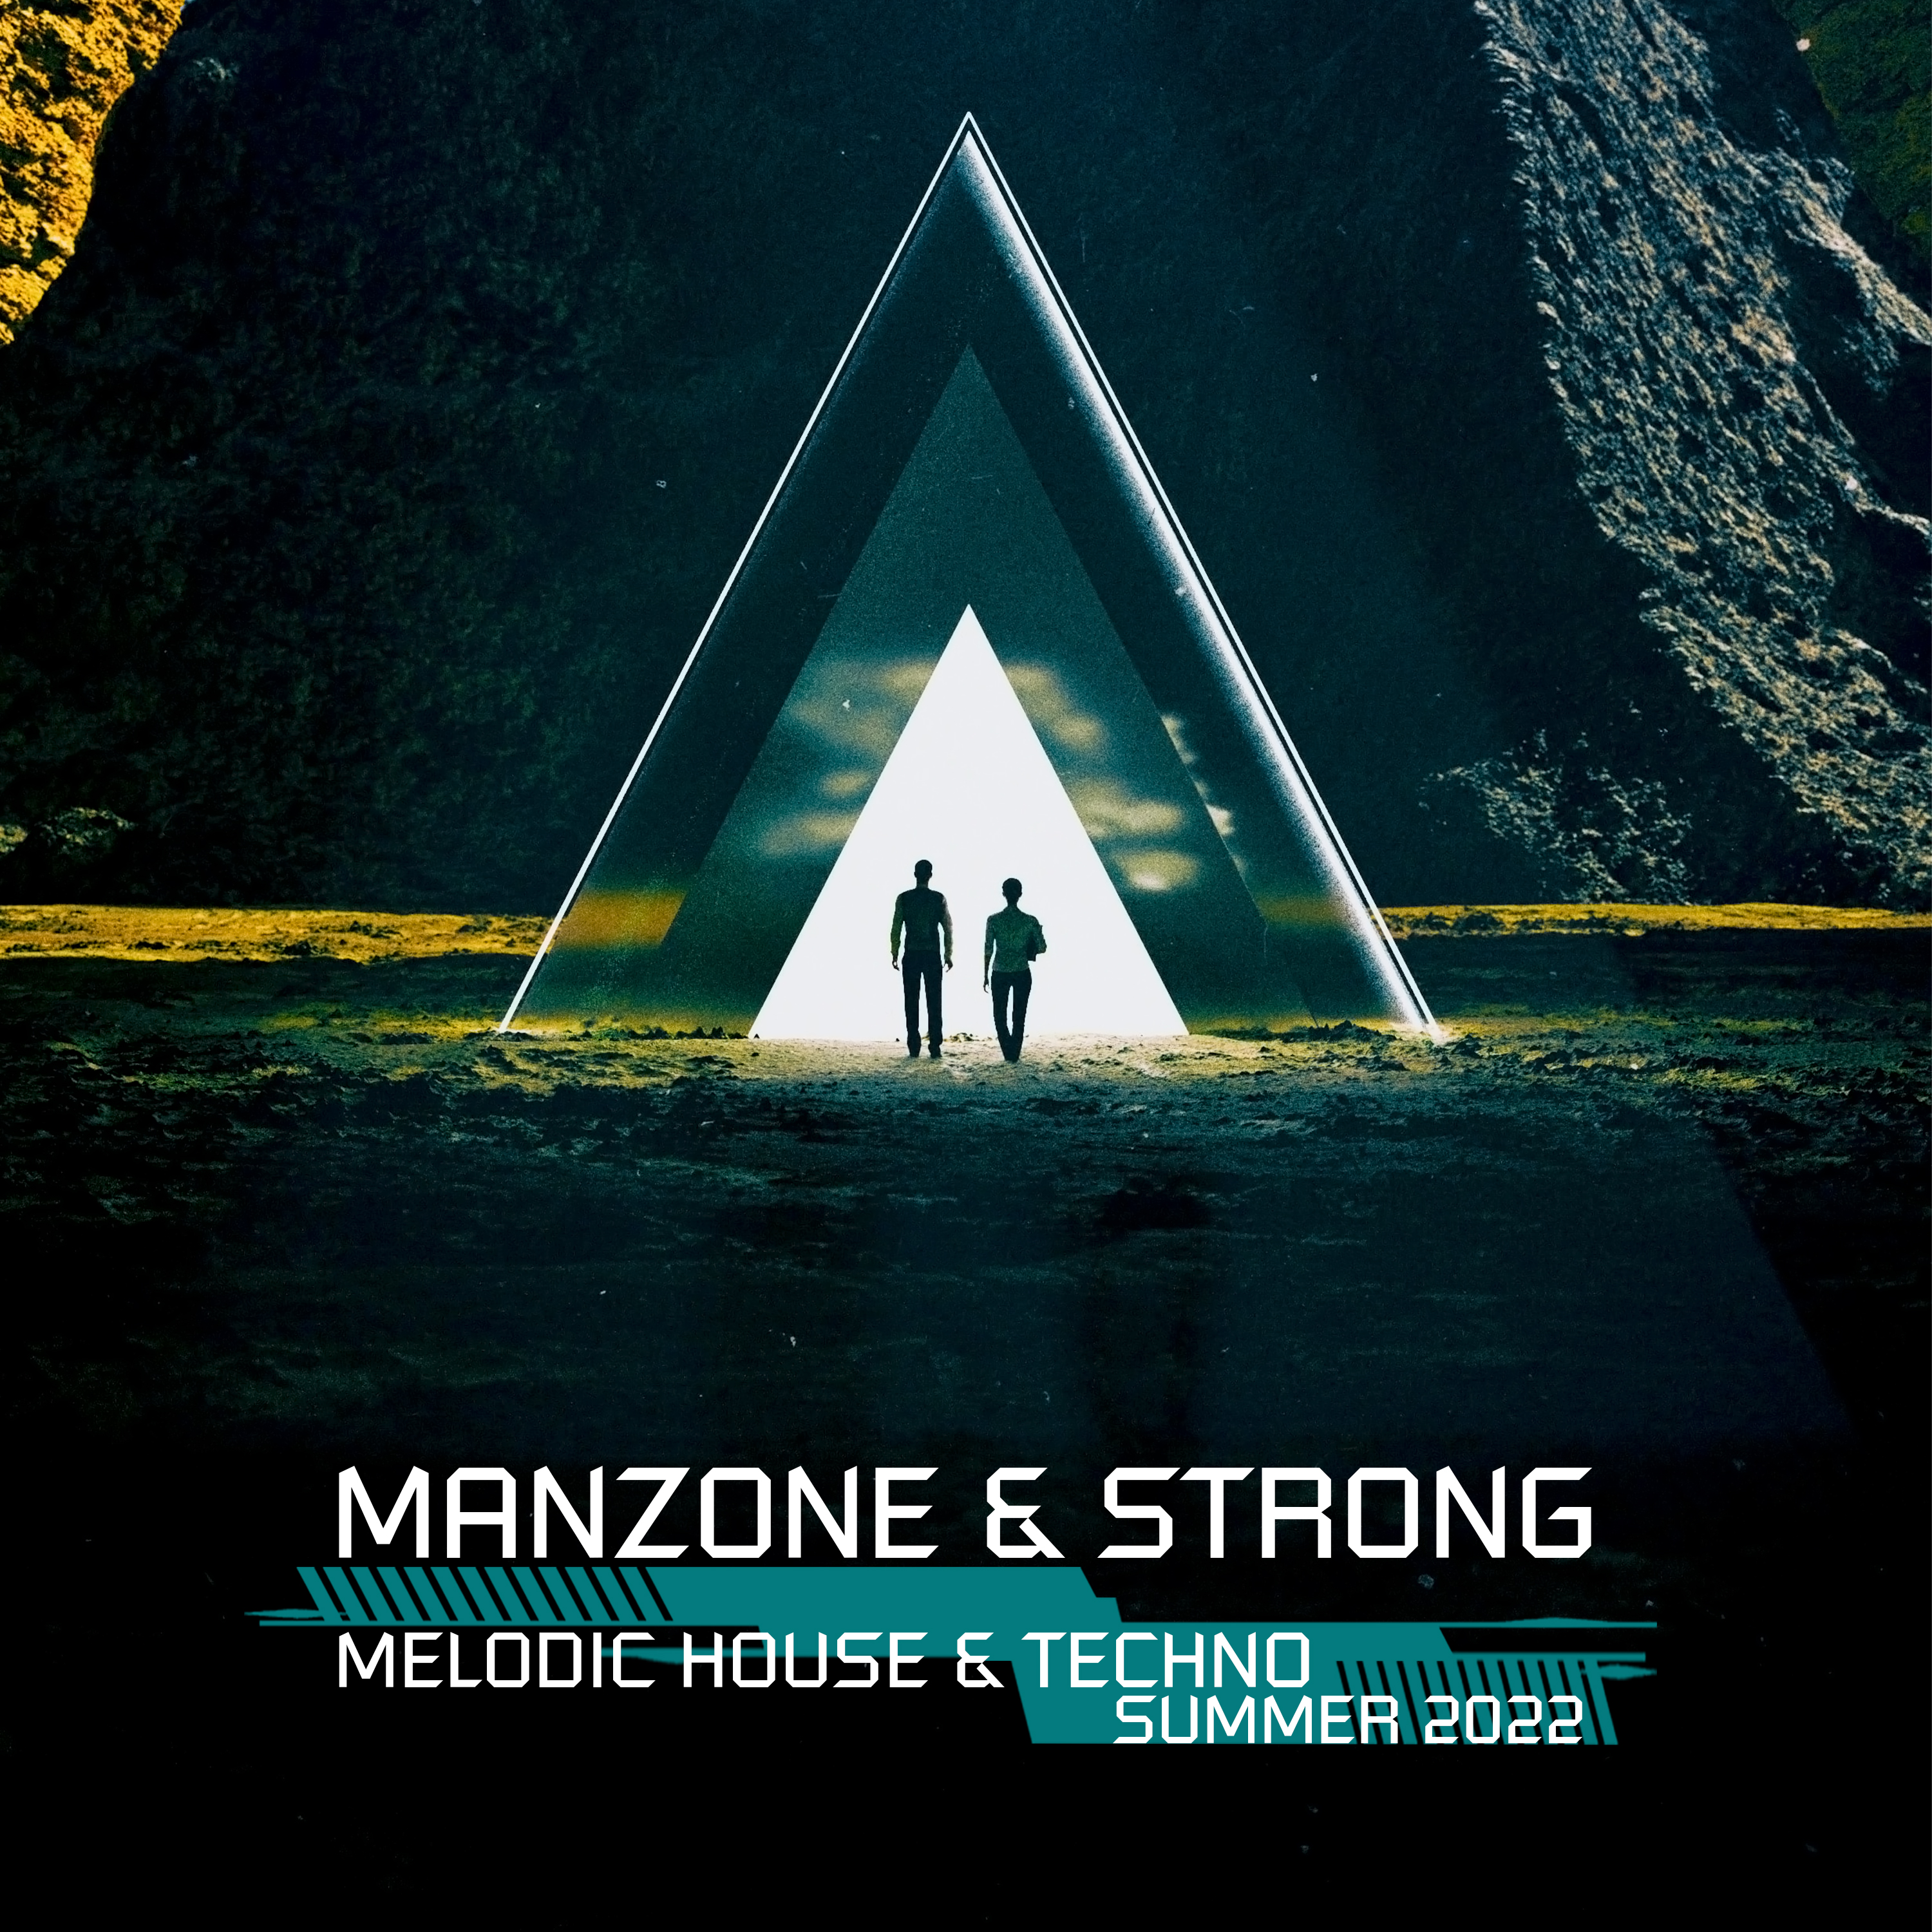 Melodic House & Techno (Summer 2022) FREE DOWNLOAD